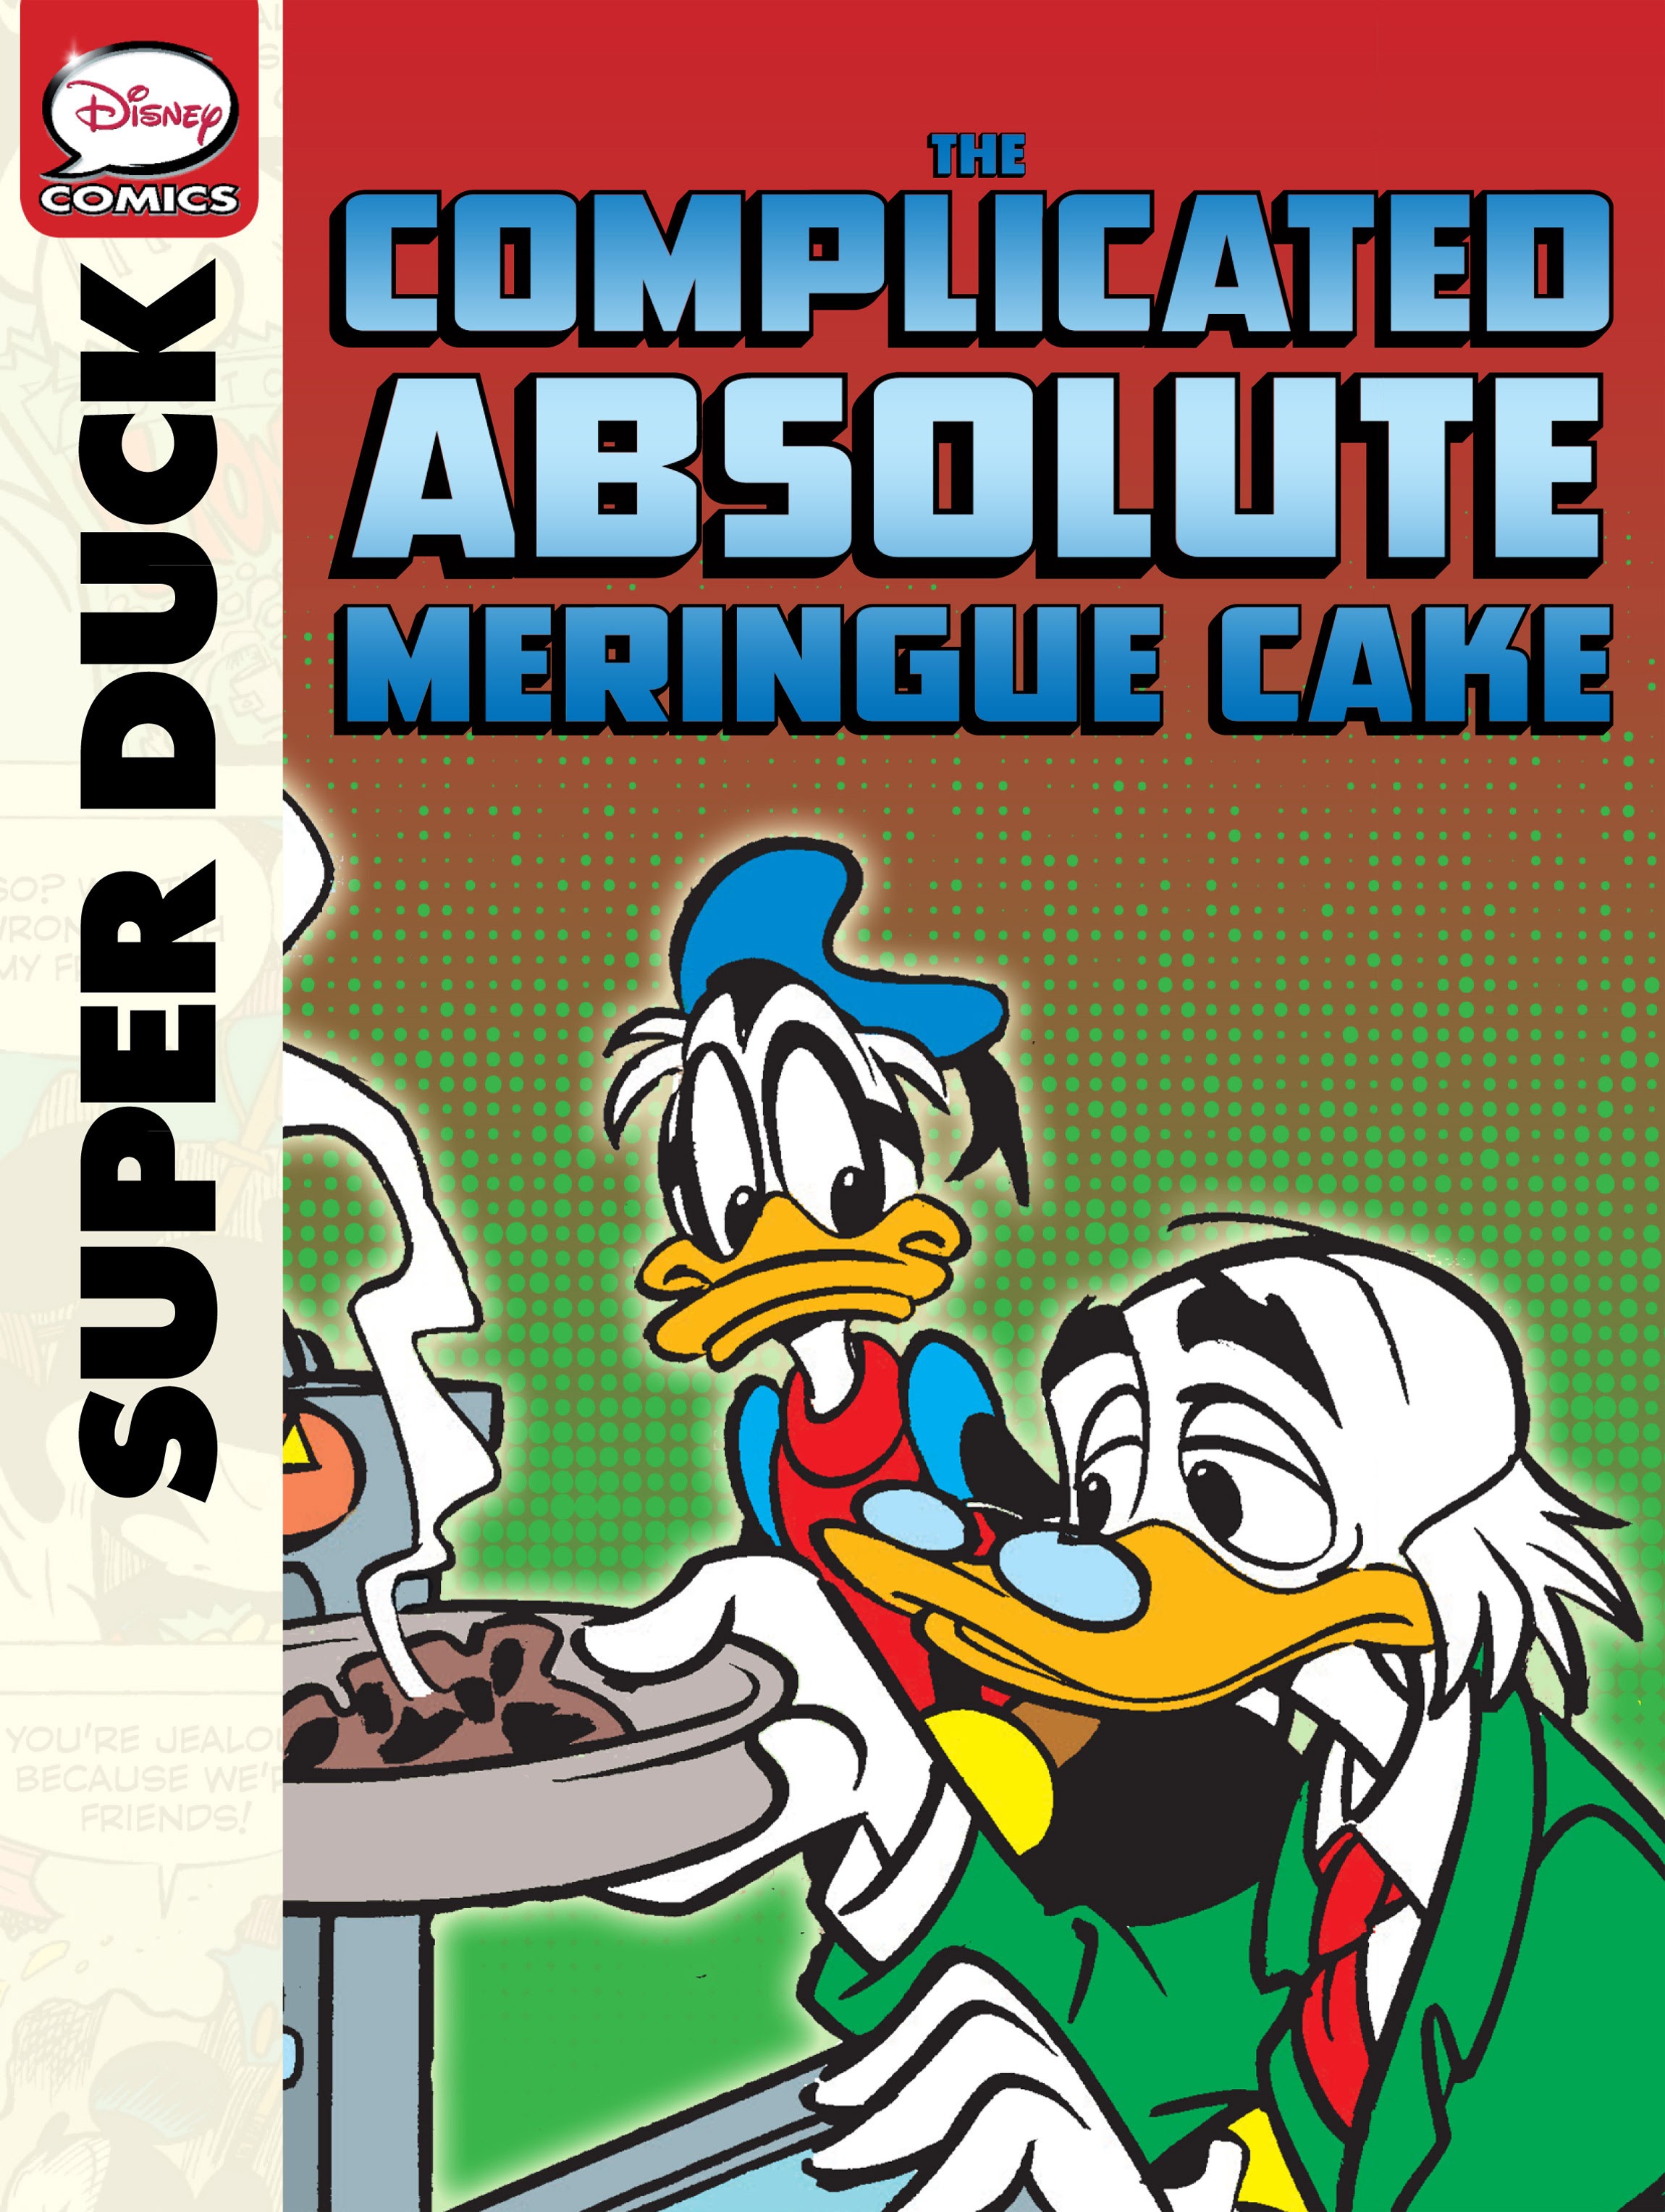 Read online Superduck and the Complicated Absolute Meringue Cake comic -  Issue # Full - 1